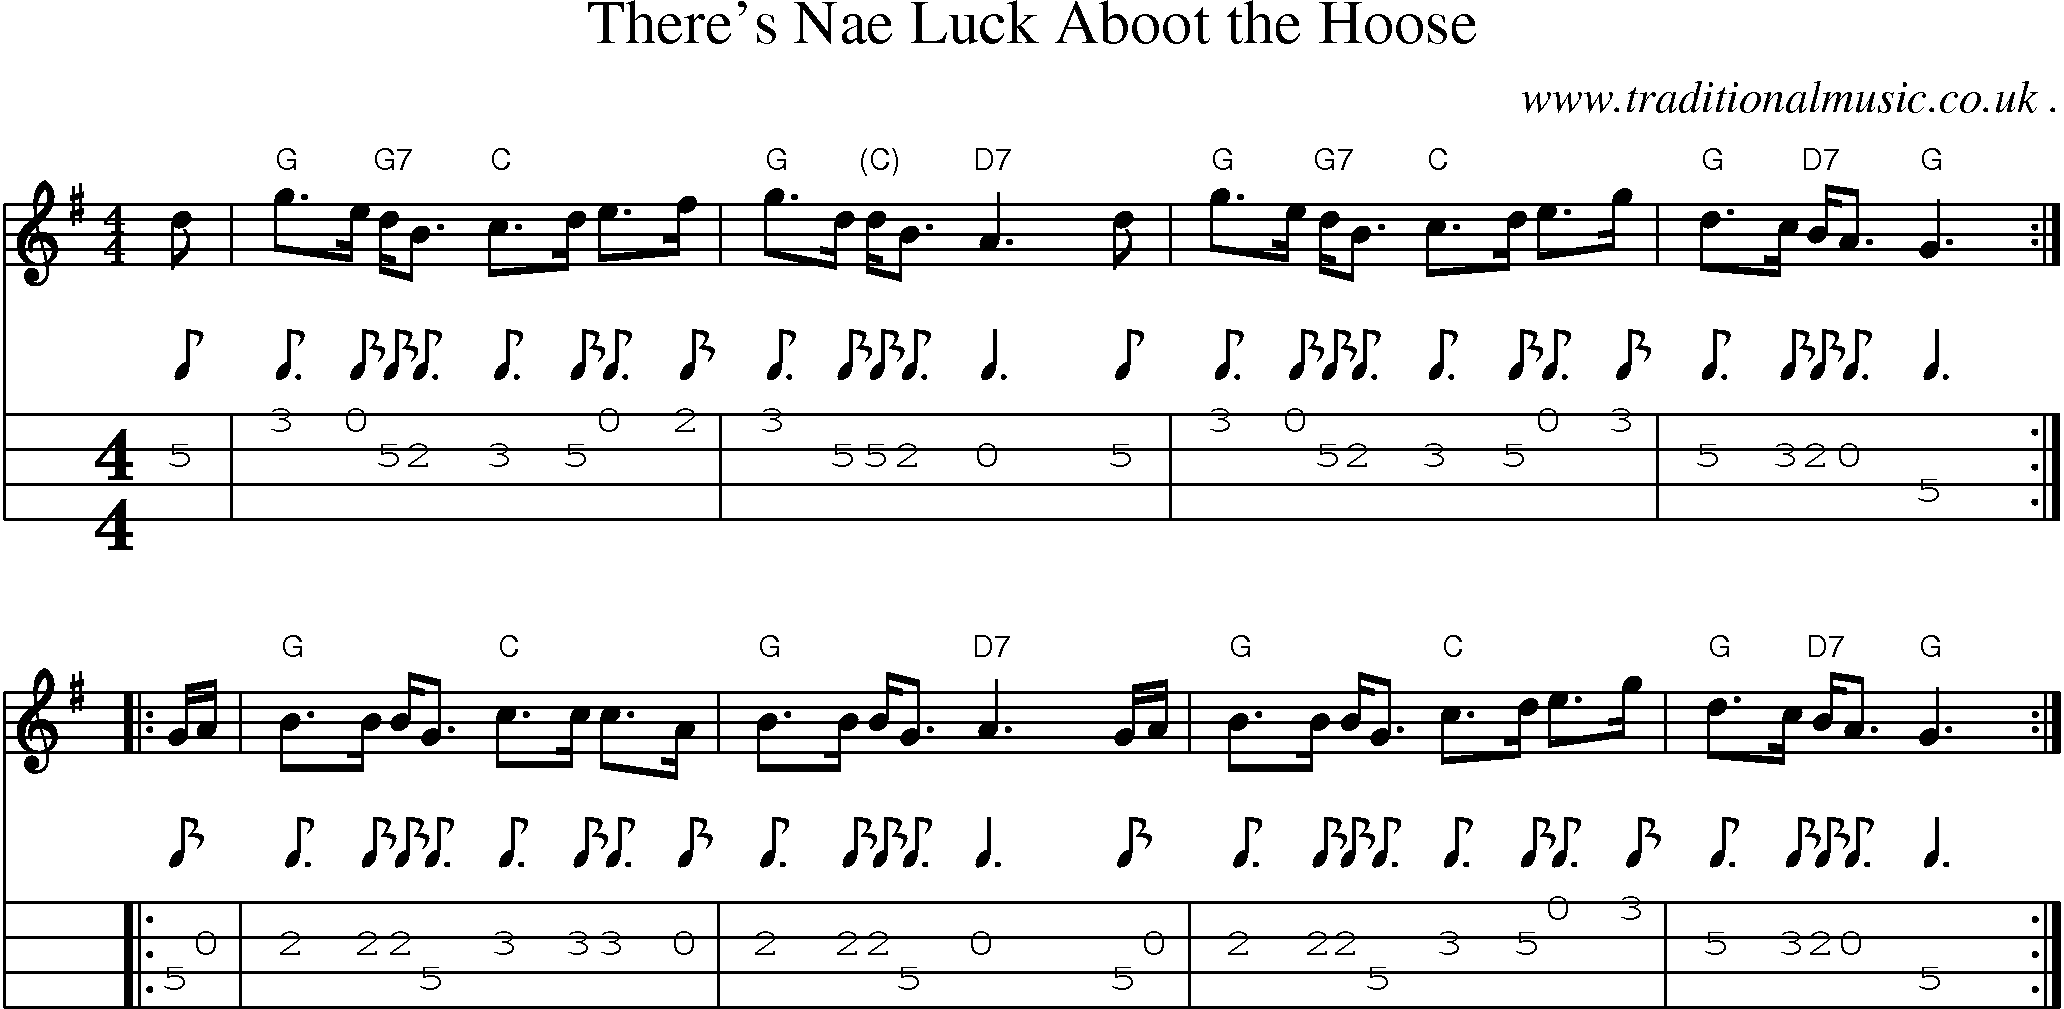 Sheet-music  score, Chords and Mandolin Tabs for Theres Nae Luck Aboot The Hoose